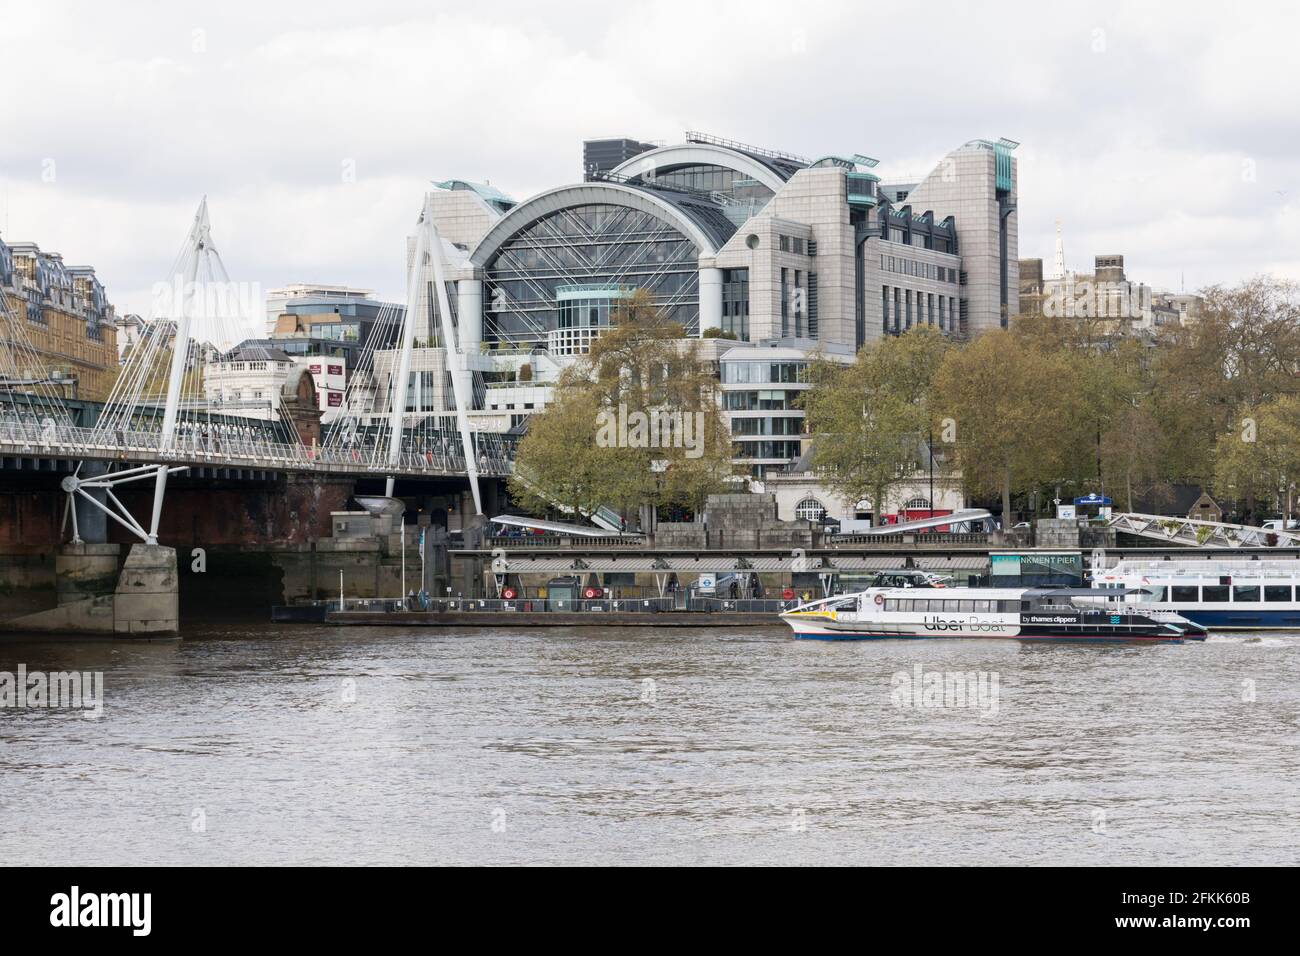 A Thames Clipper Uber Boat next berths at the Victoria Embankment landing stage on the River Thames. Charing Cross railway station in the background. Stock Photo